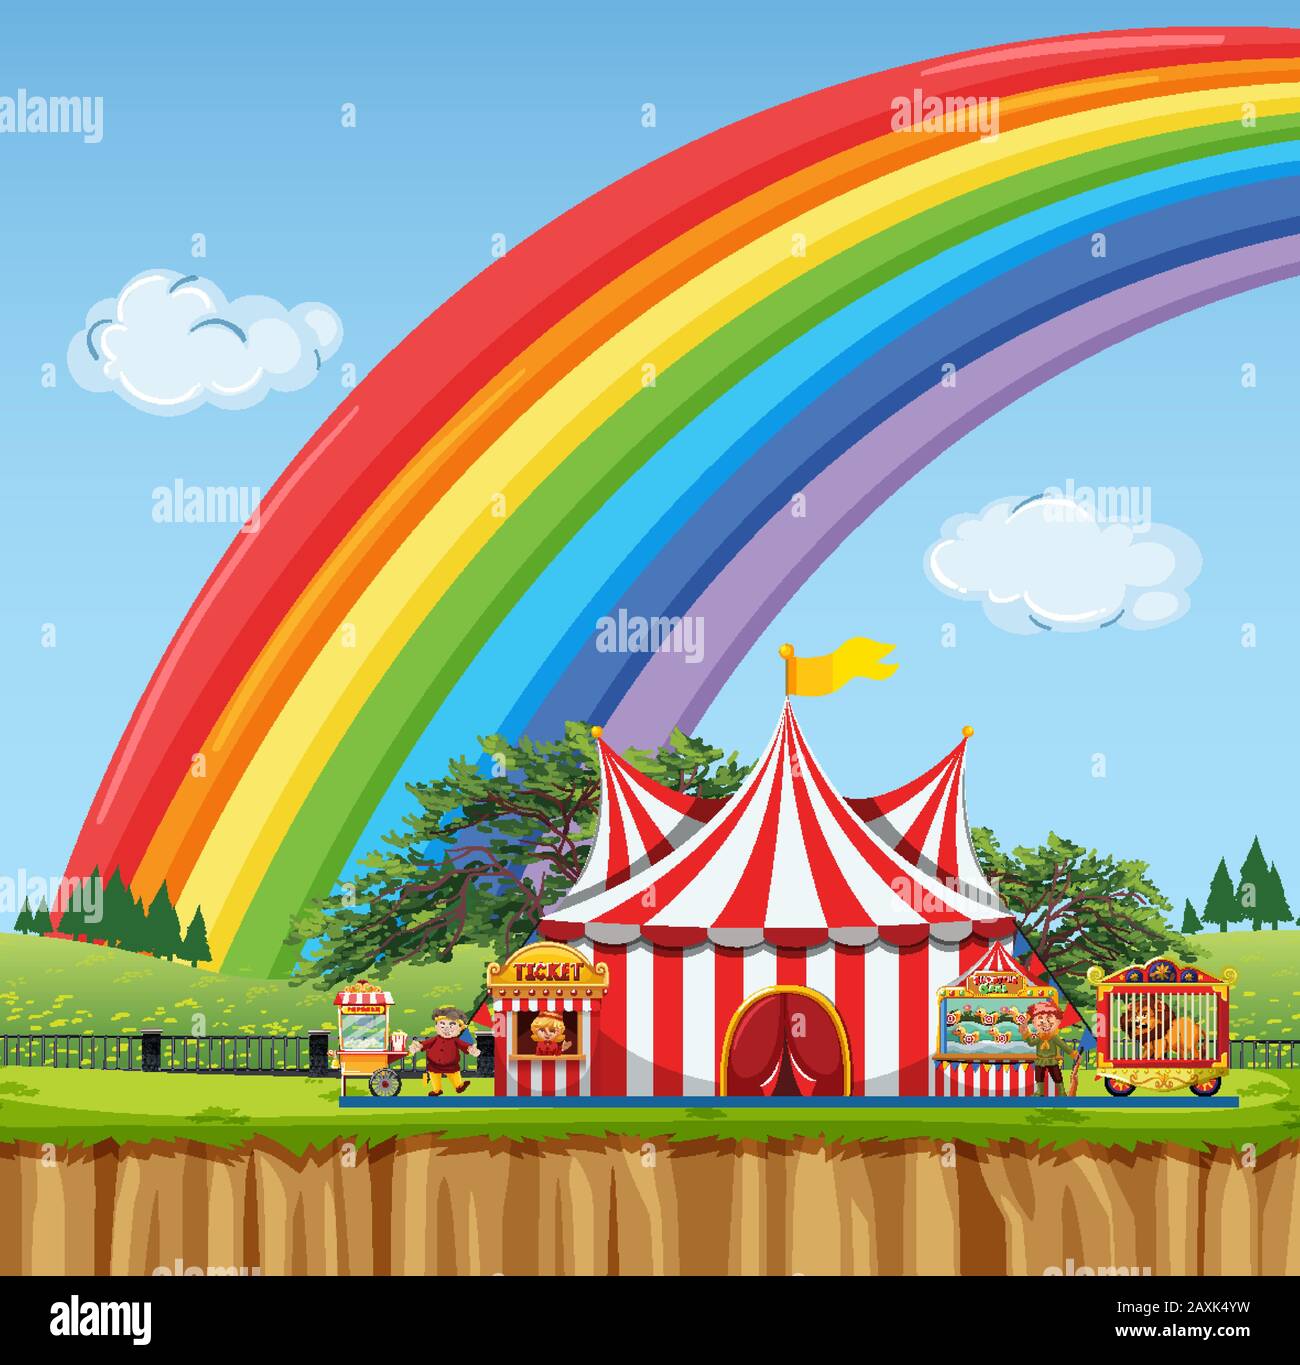 Circus Scene With Rainbow In The Sky Illustration Stock Vector Image And Art Alamy 